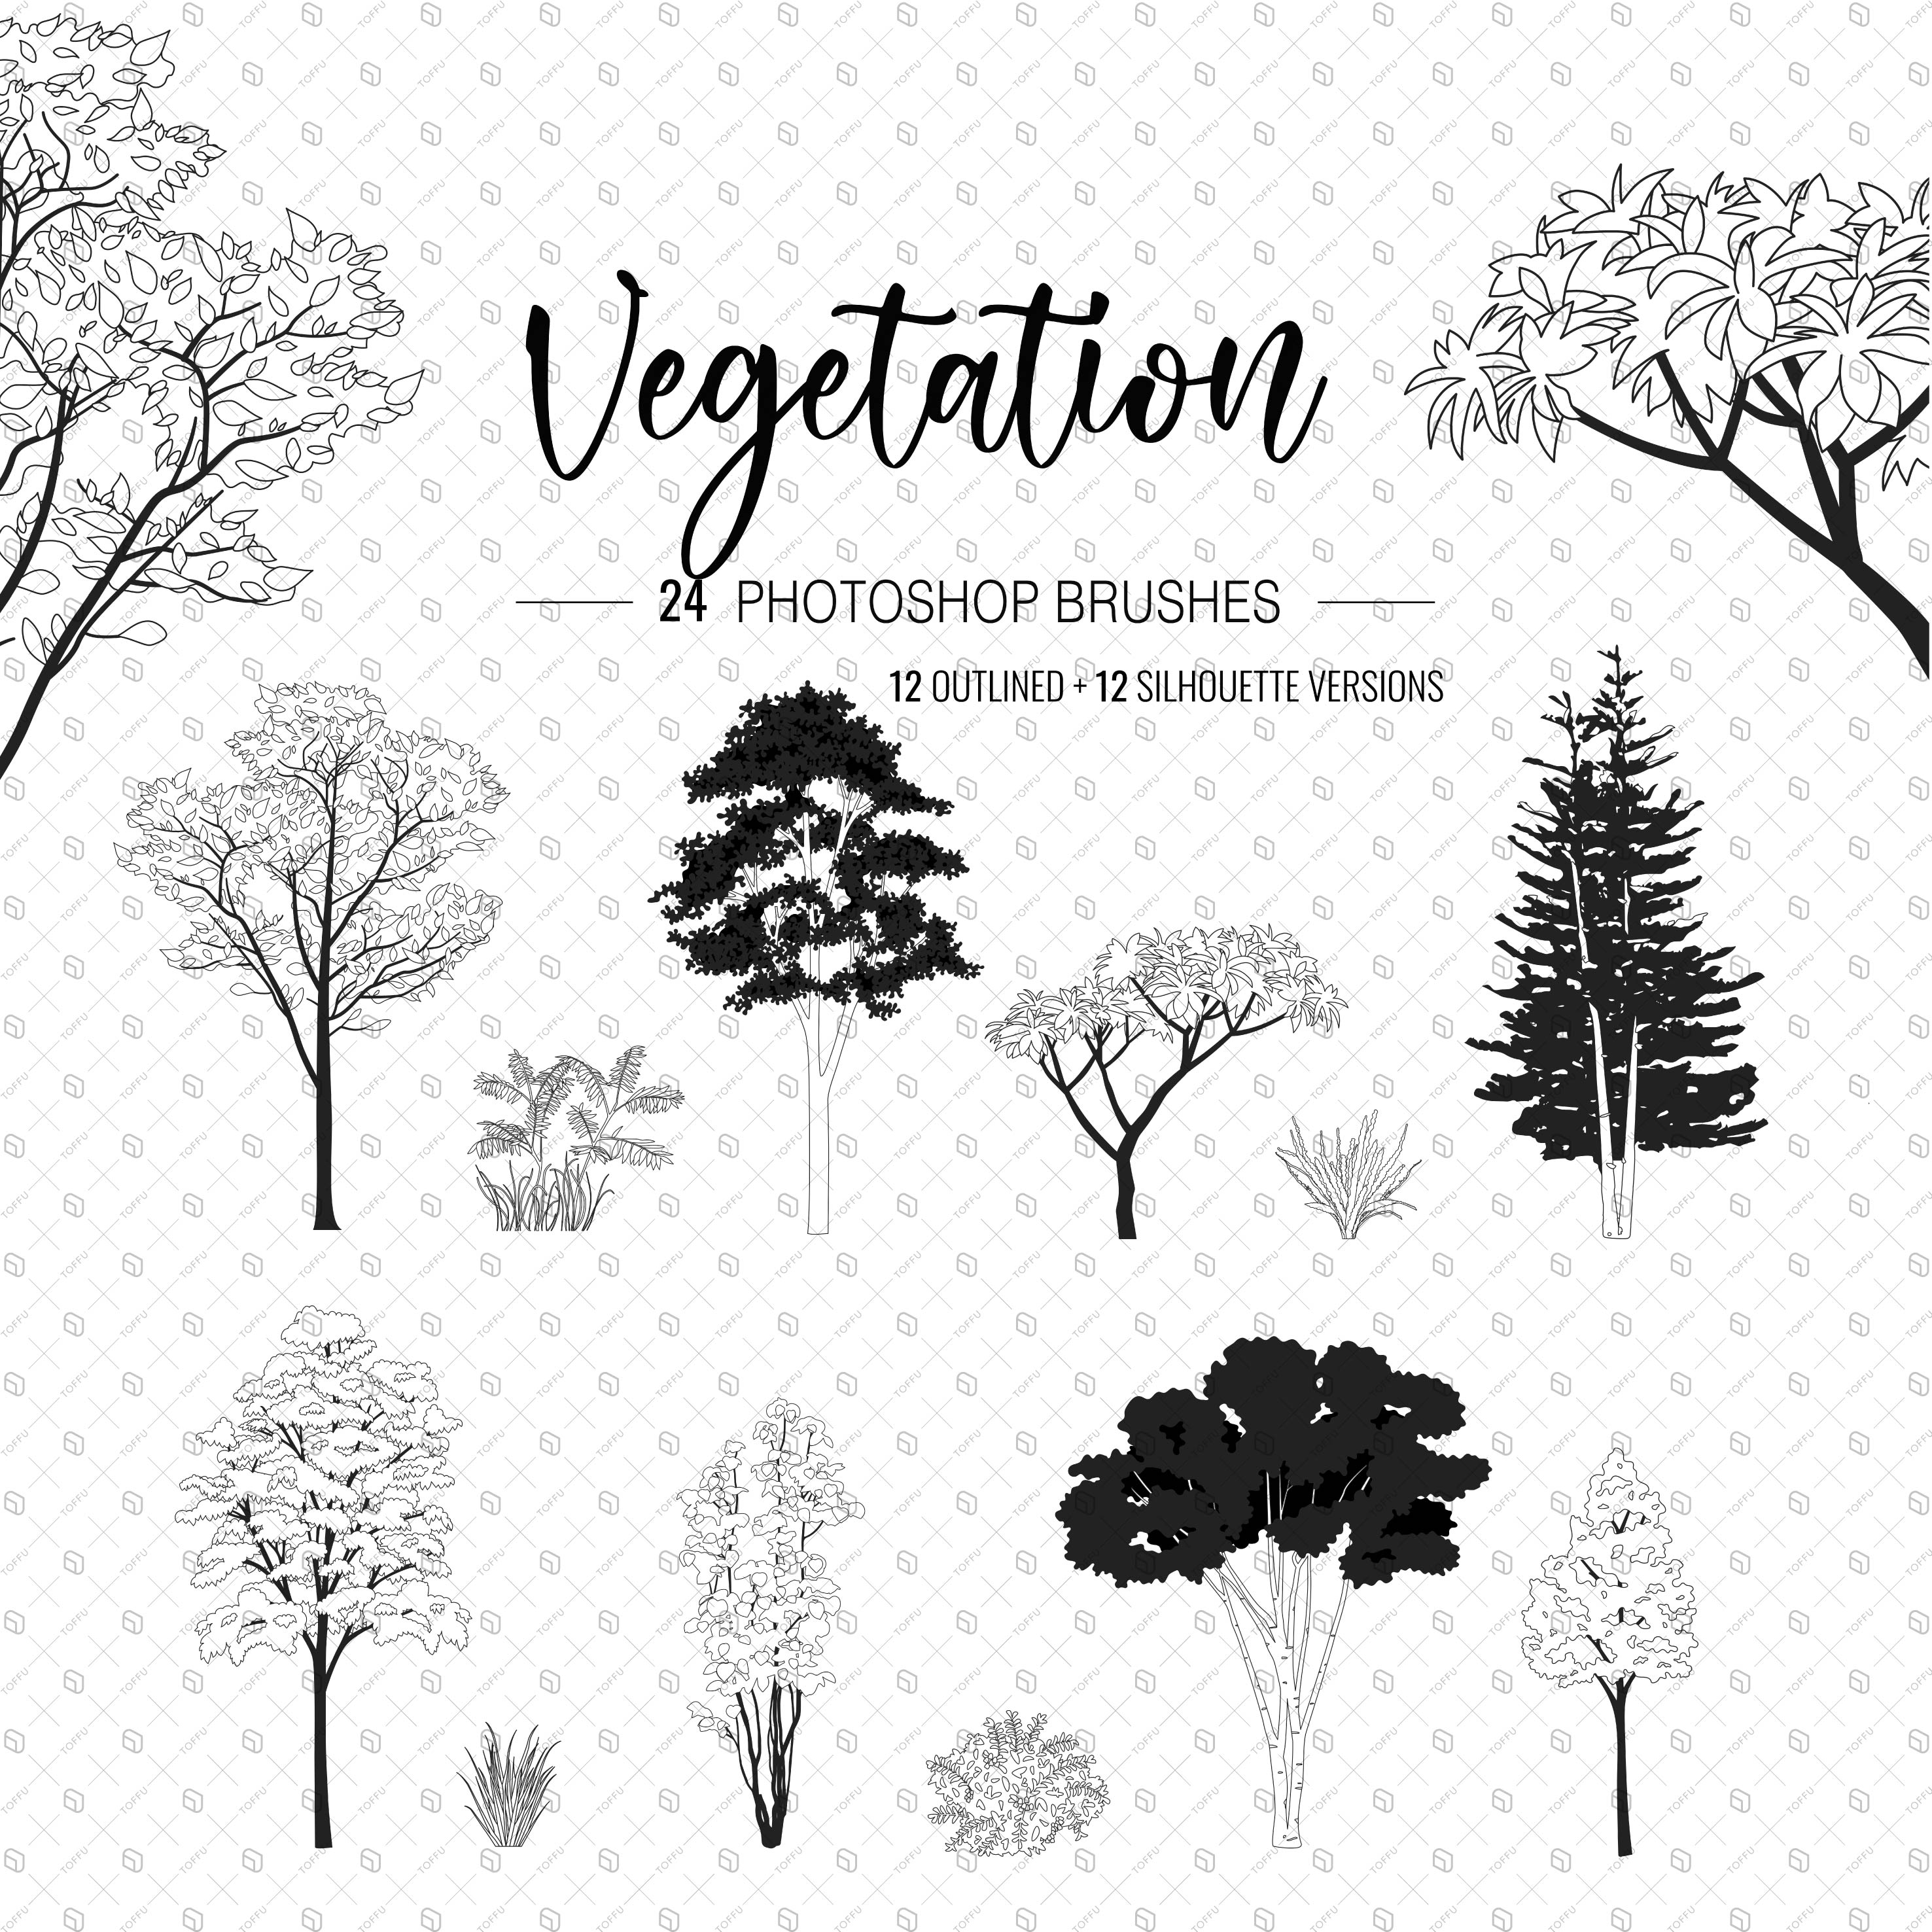 Brush Vegetation Outlined and Silhouette PNG - Toffu Co